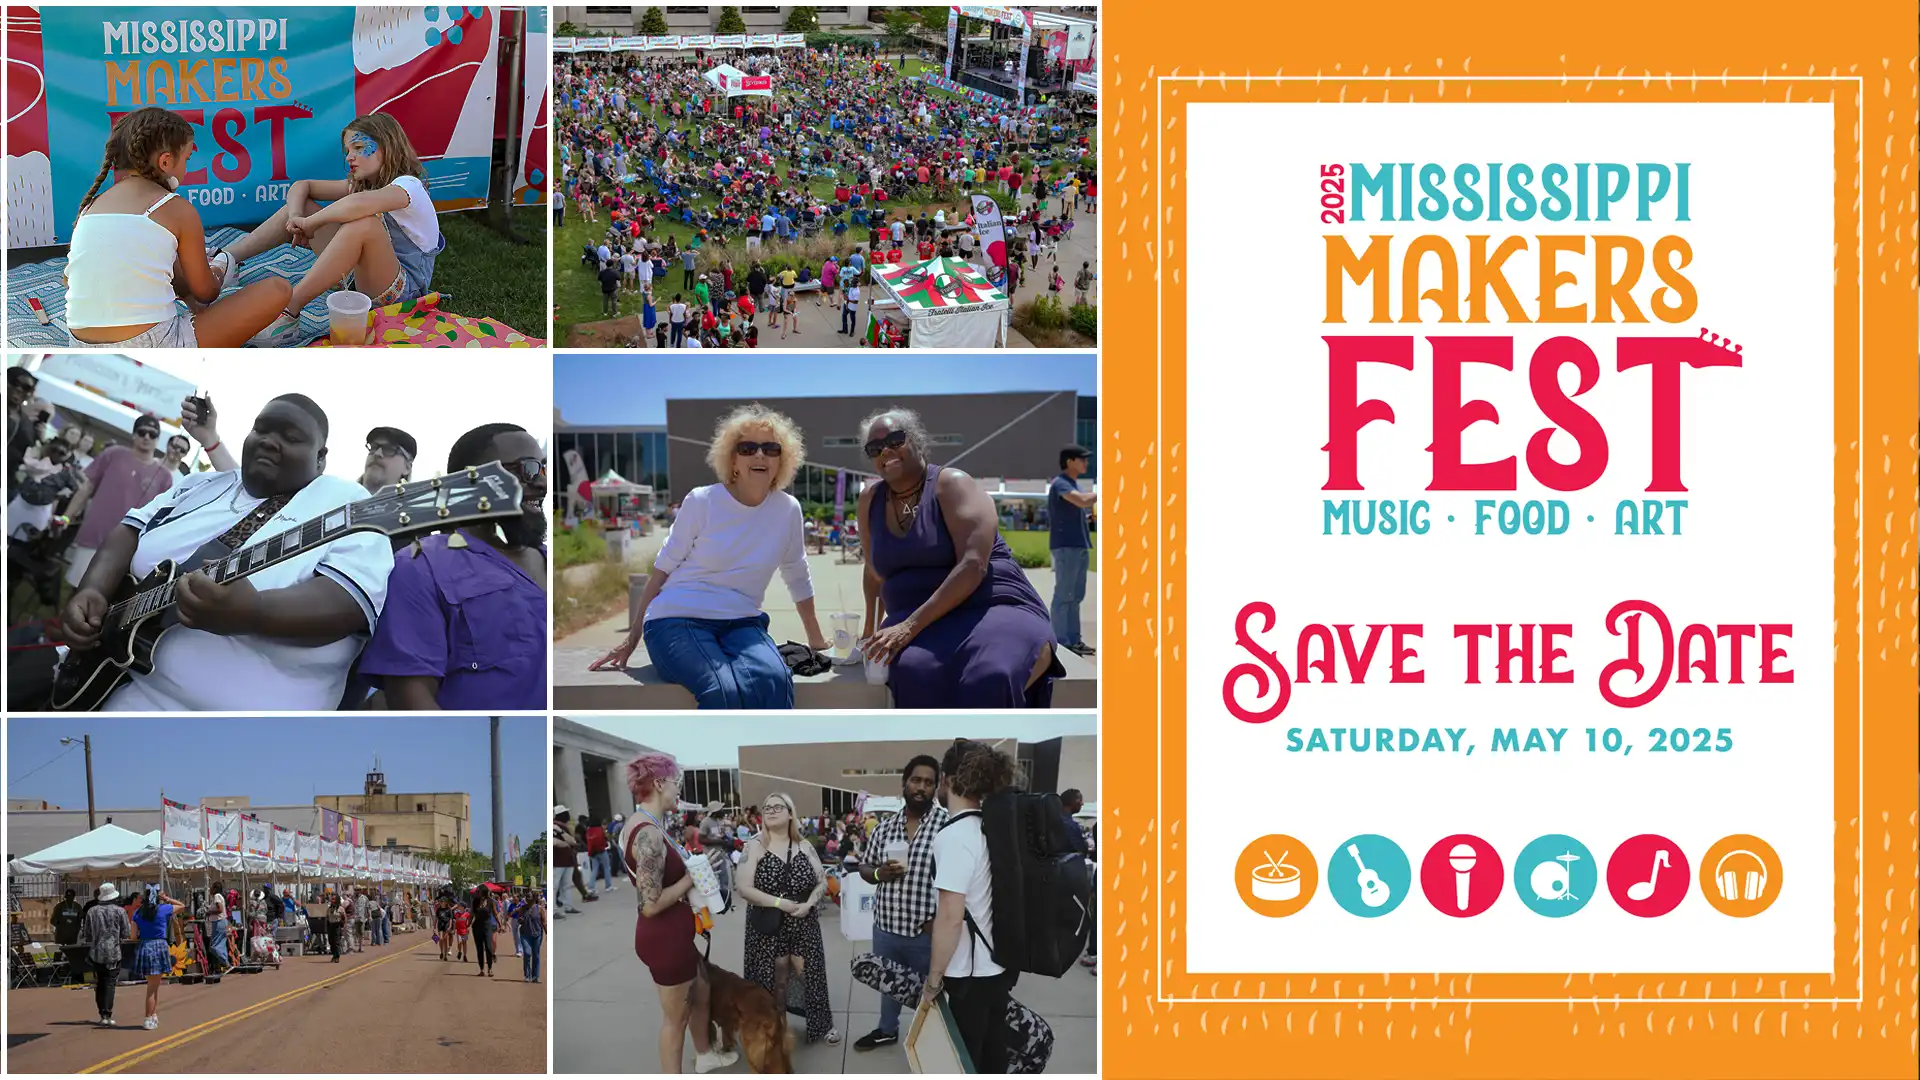 Save the Date - Mississippi Makers Fest 2025